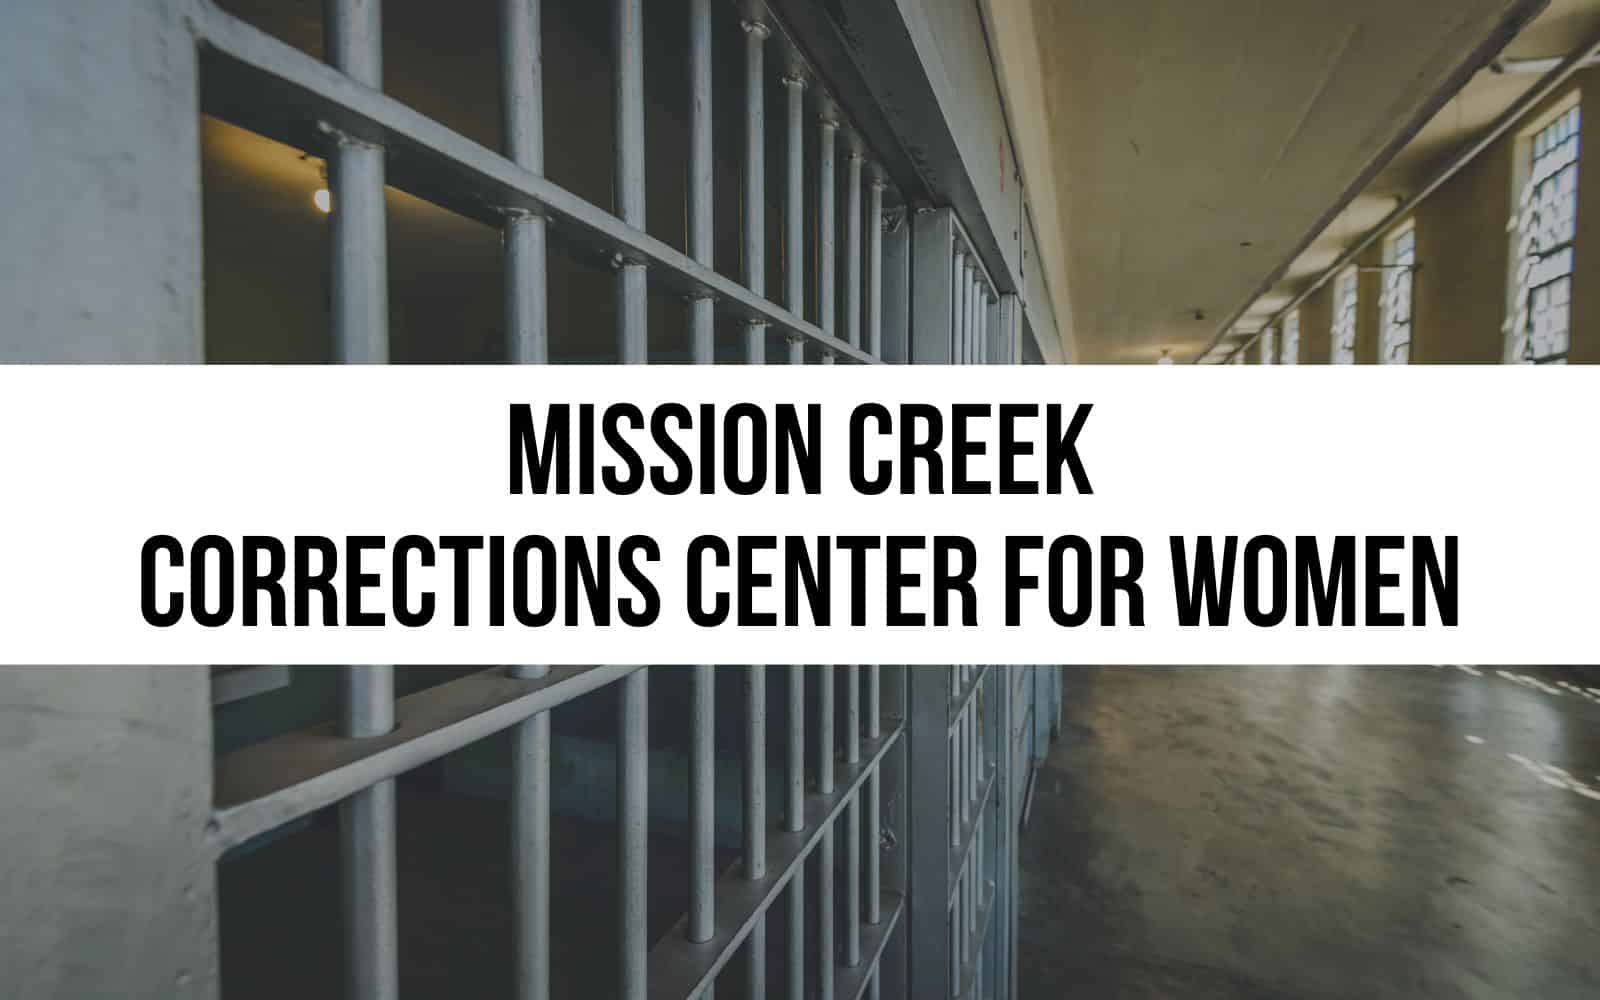 Mission Creek Corrections Center for Women